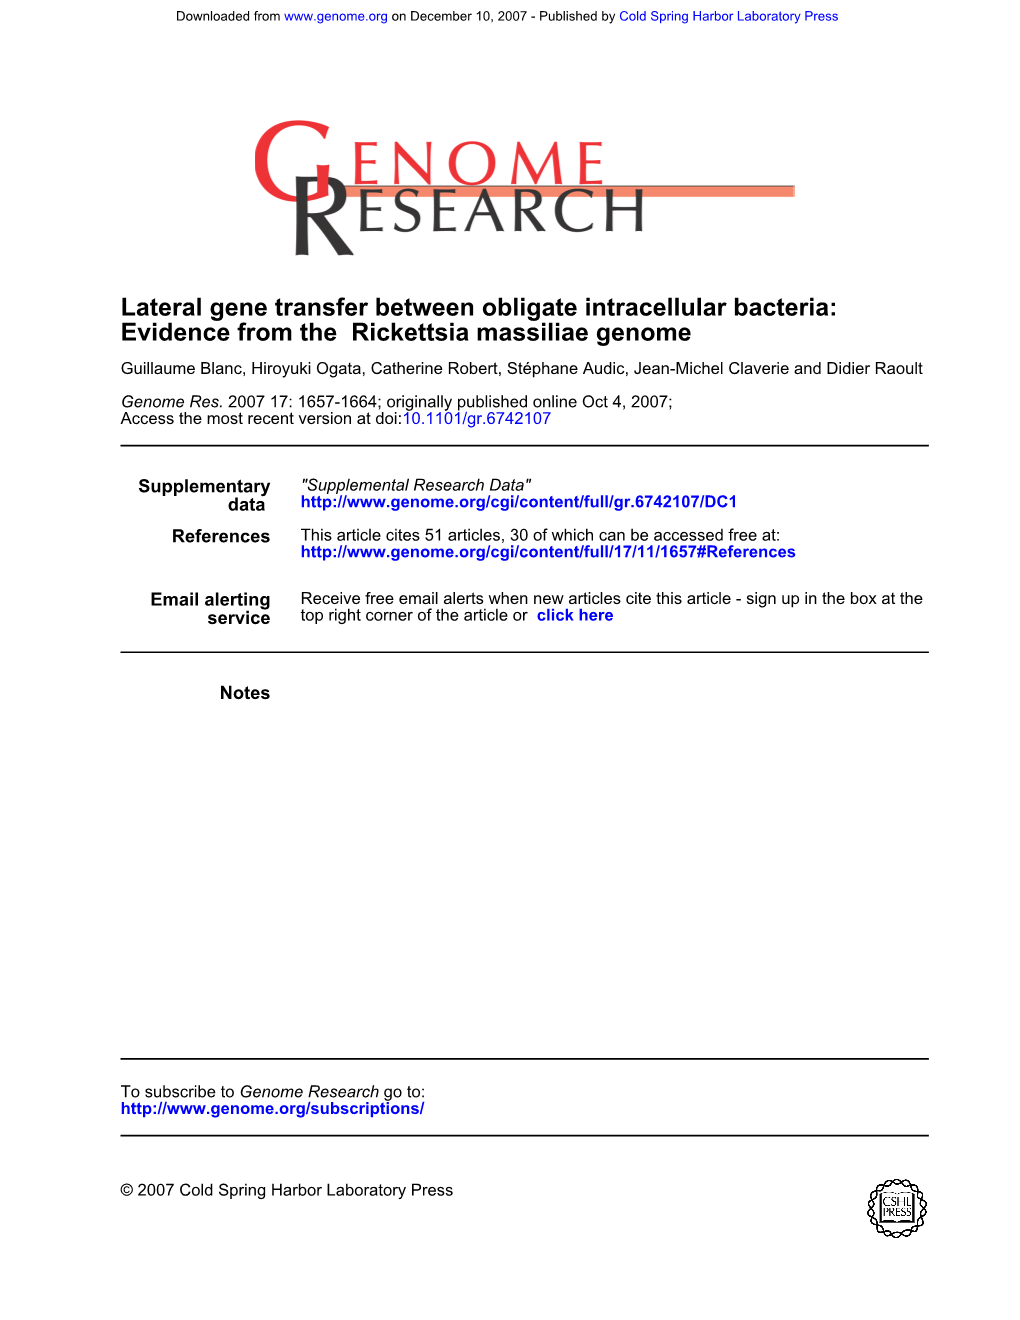 Genome Rickettsia Massiliae Evidence from the Lateral Gene